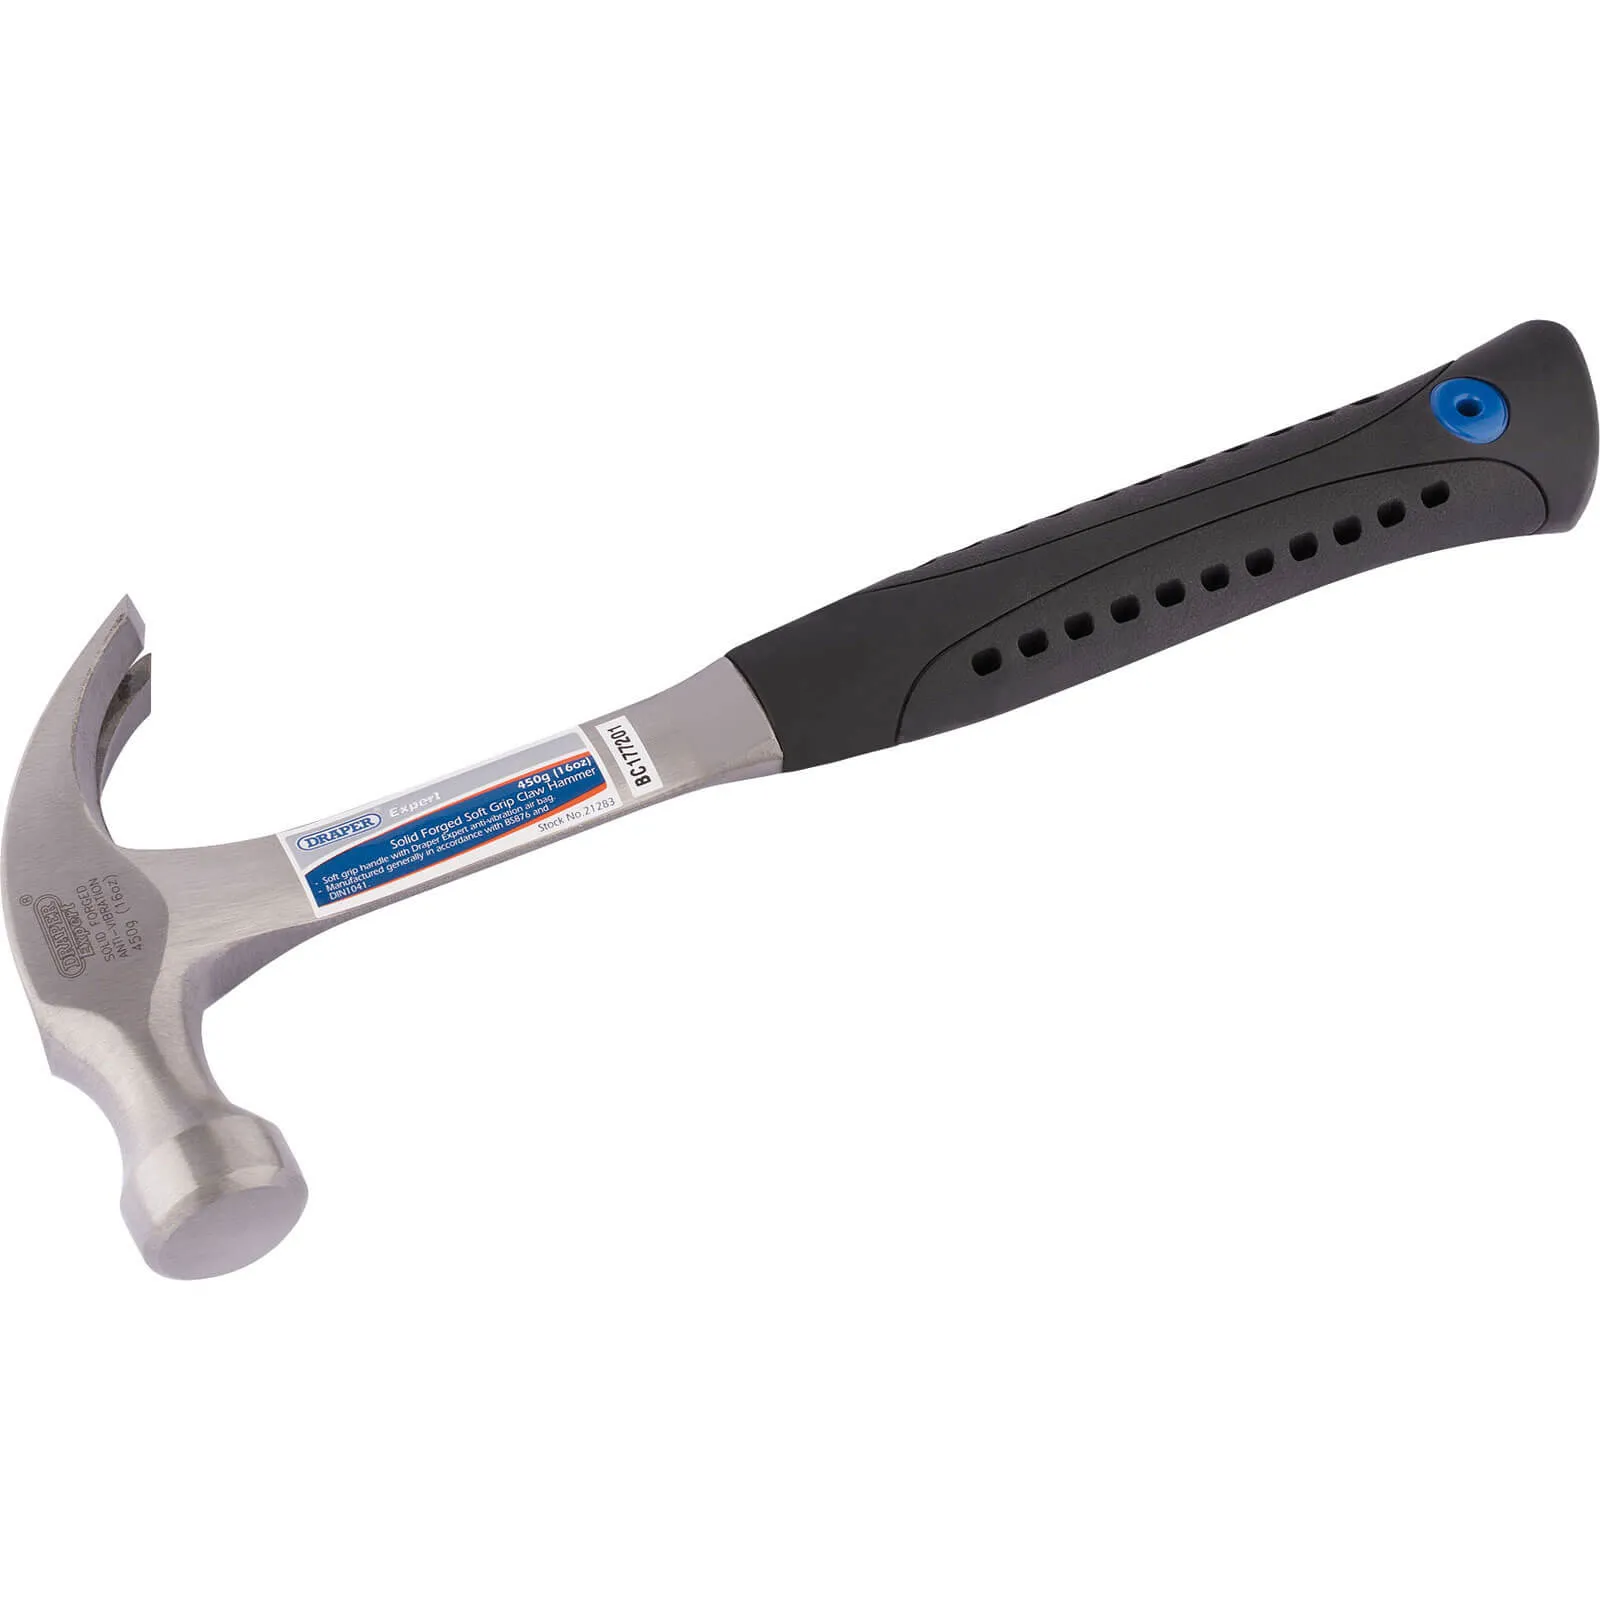 Draper Expert Solid Forged Claw Hammer - 450g